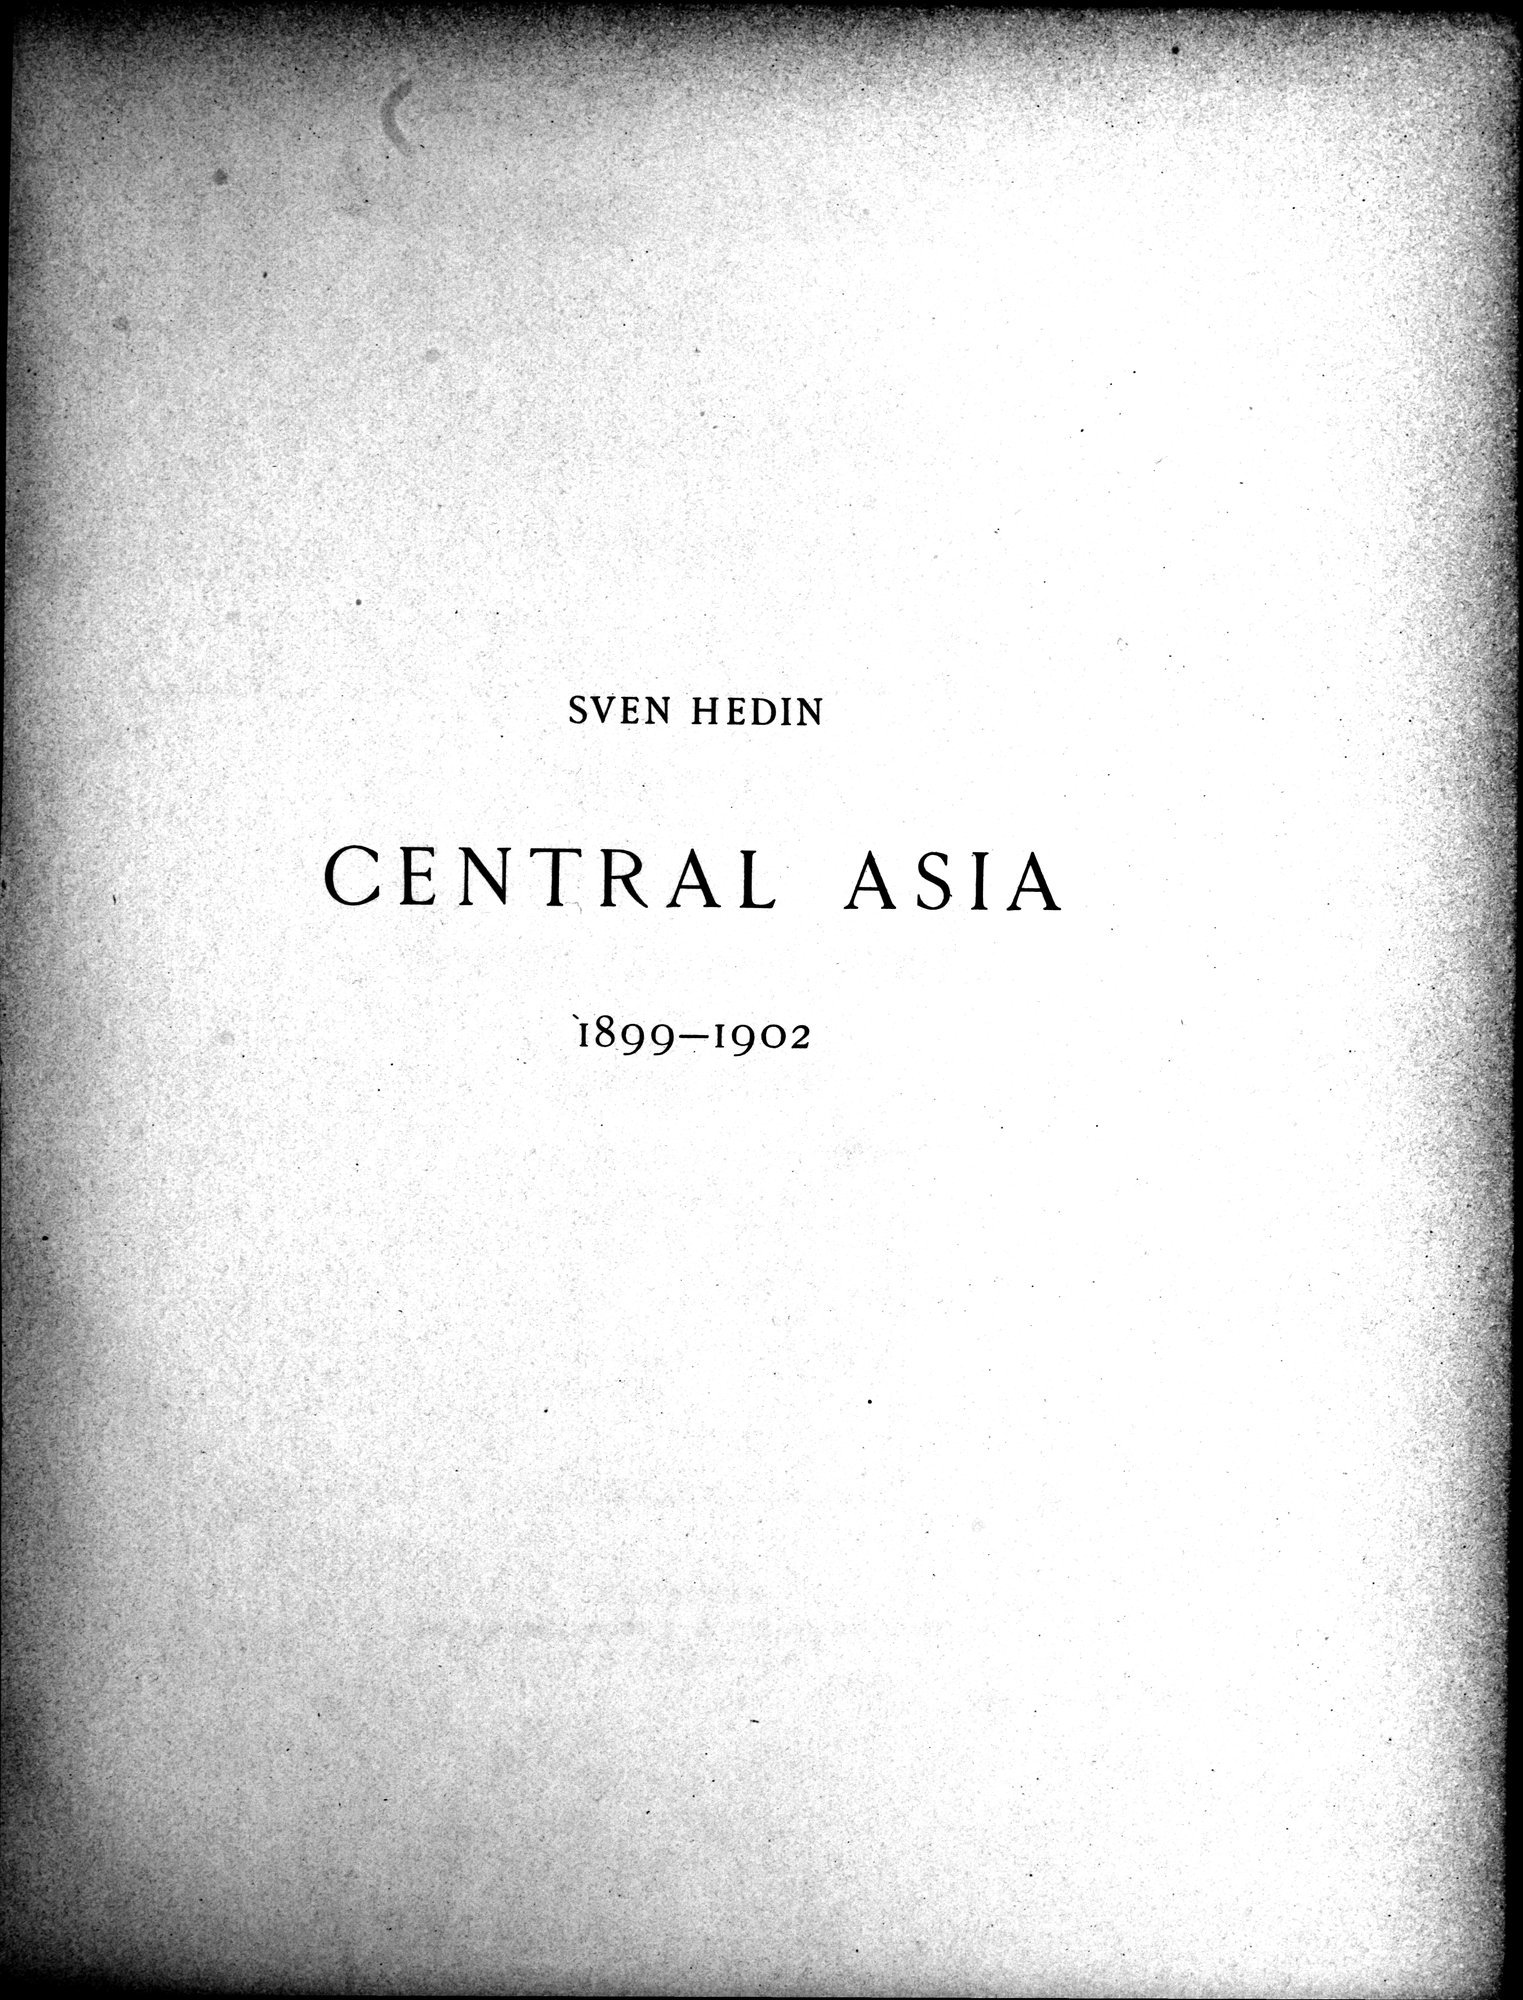 Scientific Results of a Journey in Central Asia, 1899-1902 : vol.3 / 7 ページ（白黒高解像度画像）